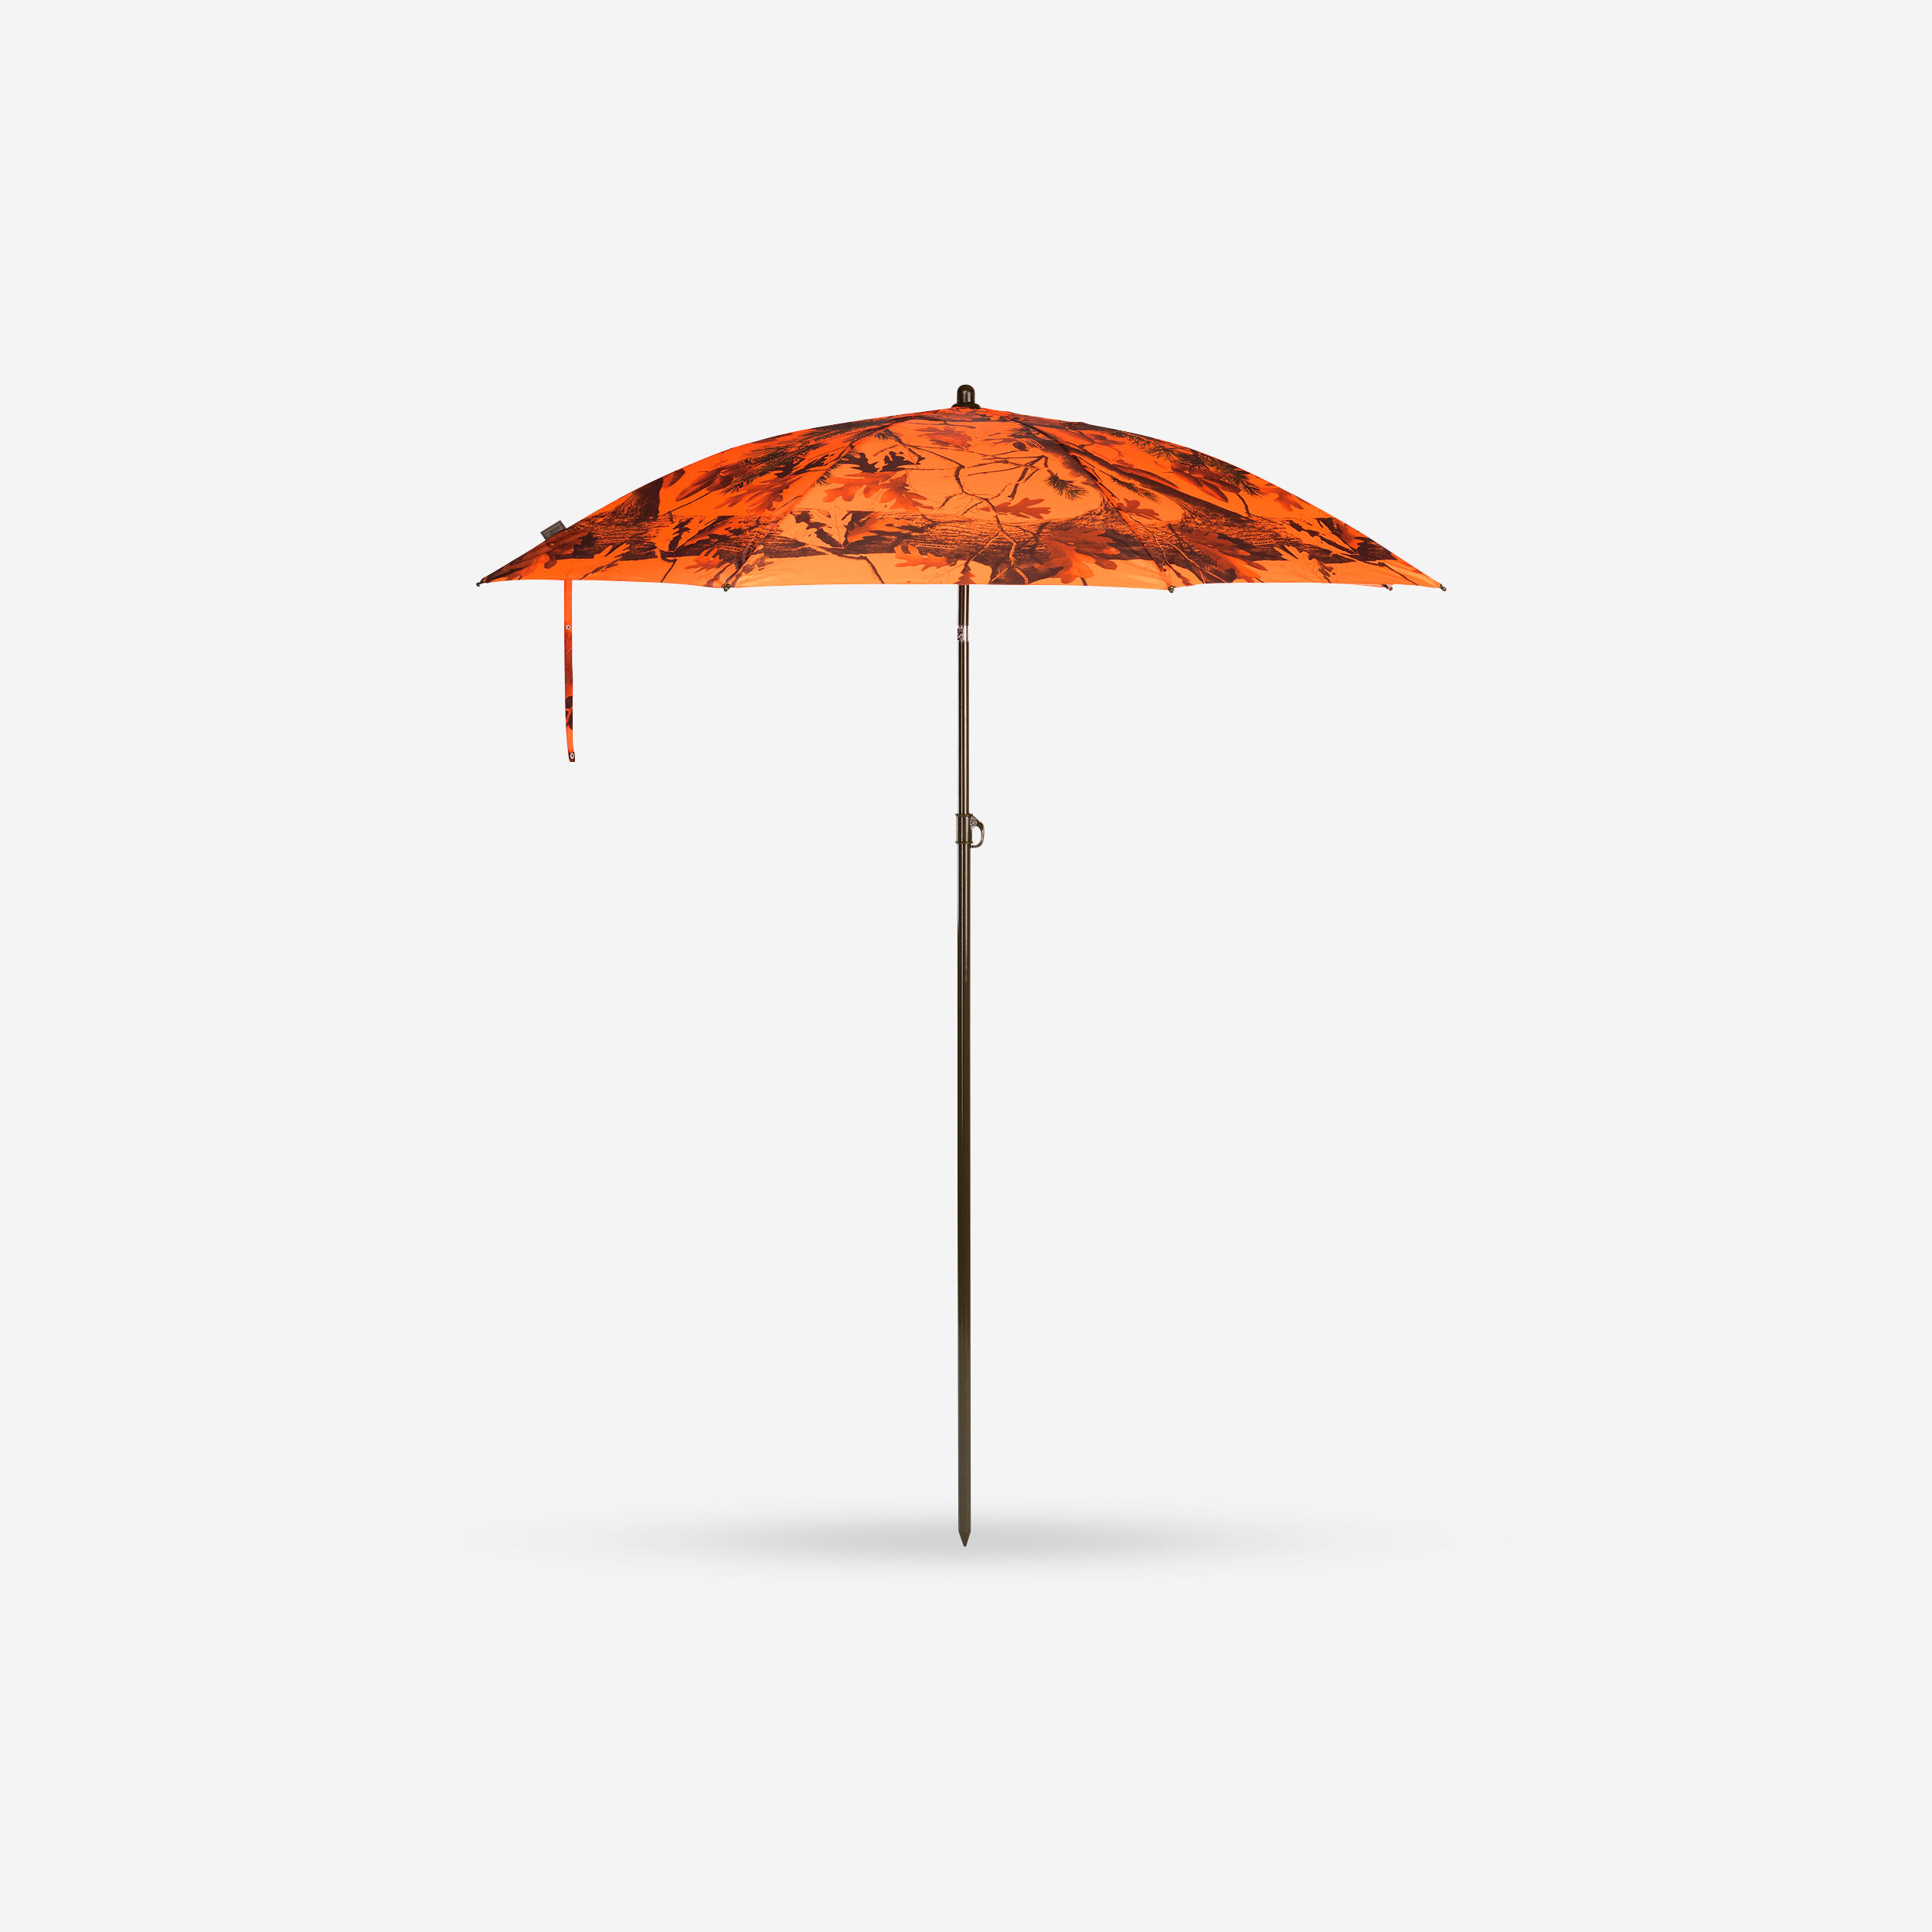 SOLOGNAC Driven Posted Hunting Umbrella camouflage neon